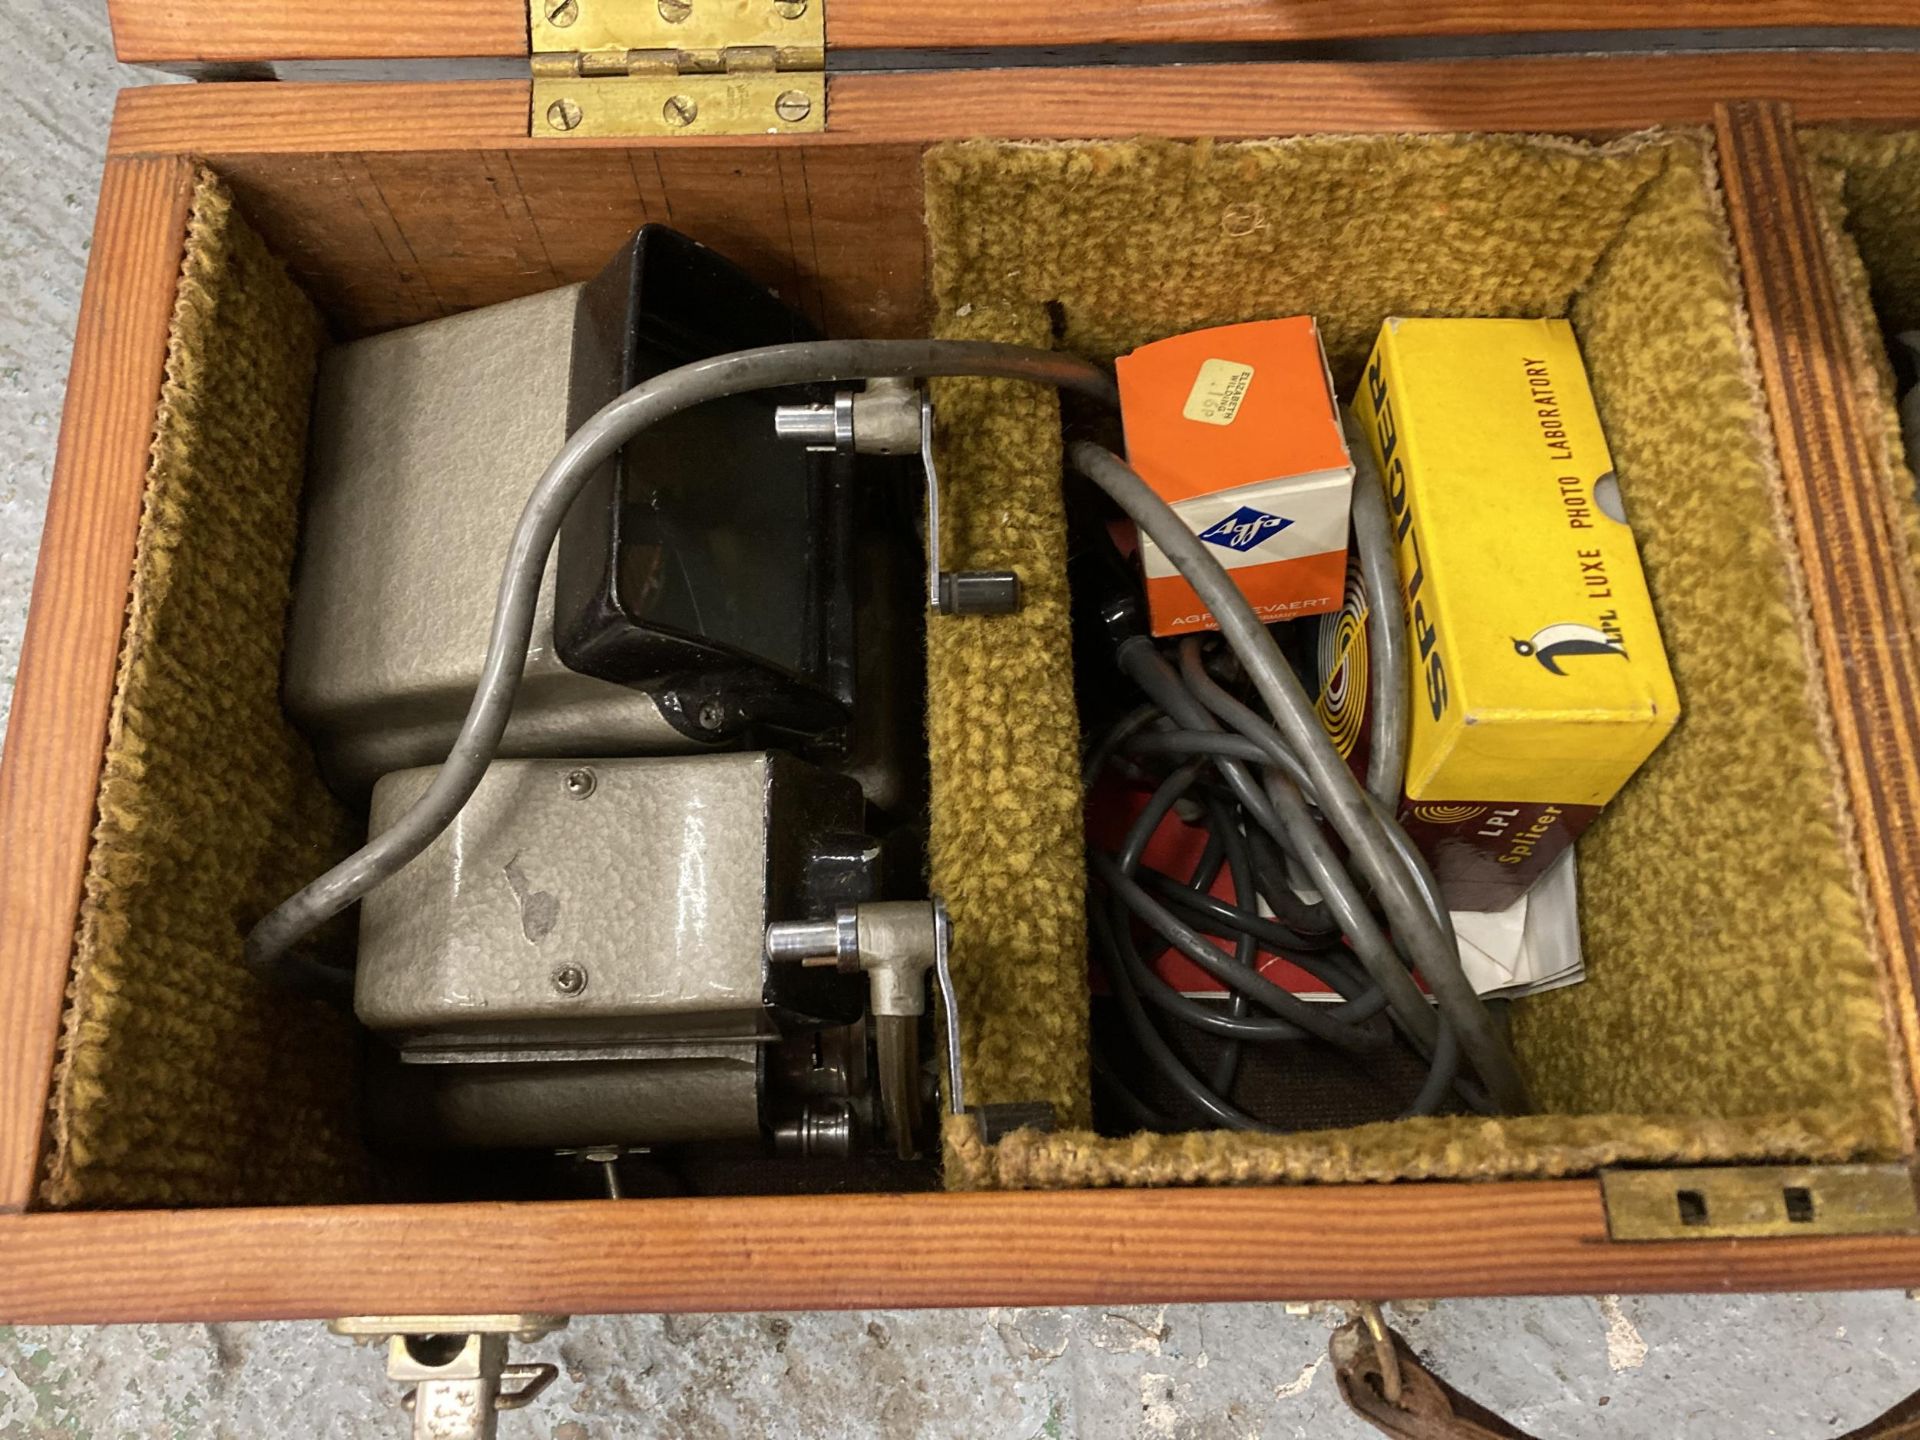 A CINE CAMERA IN A WOODEN CARRY BOX - Image 2 of 4